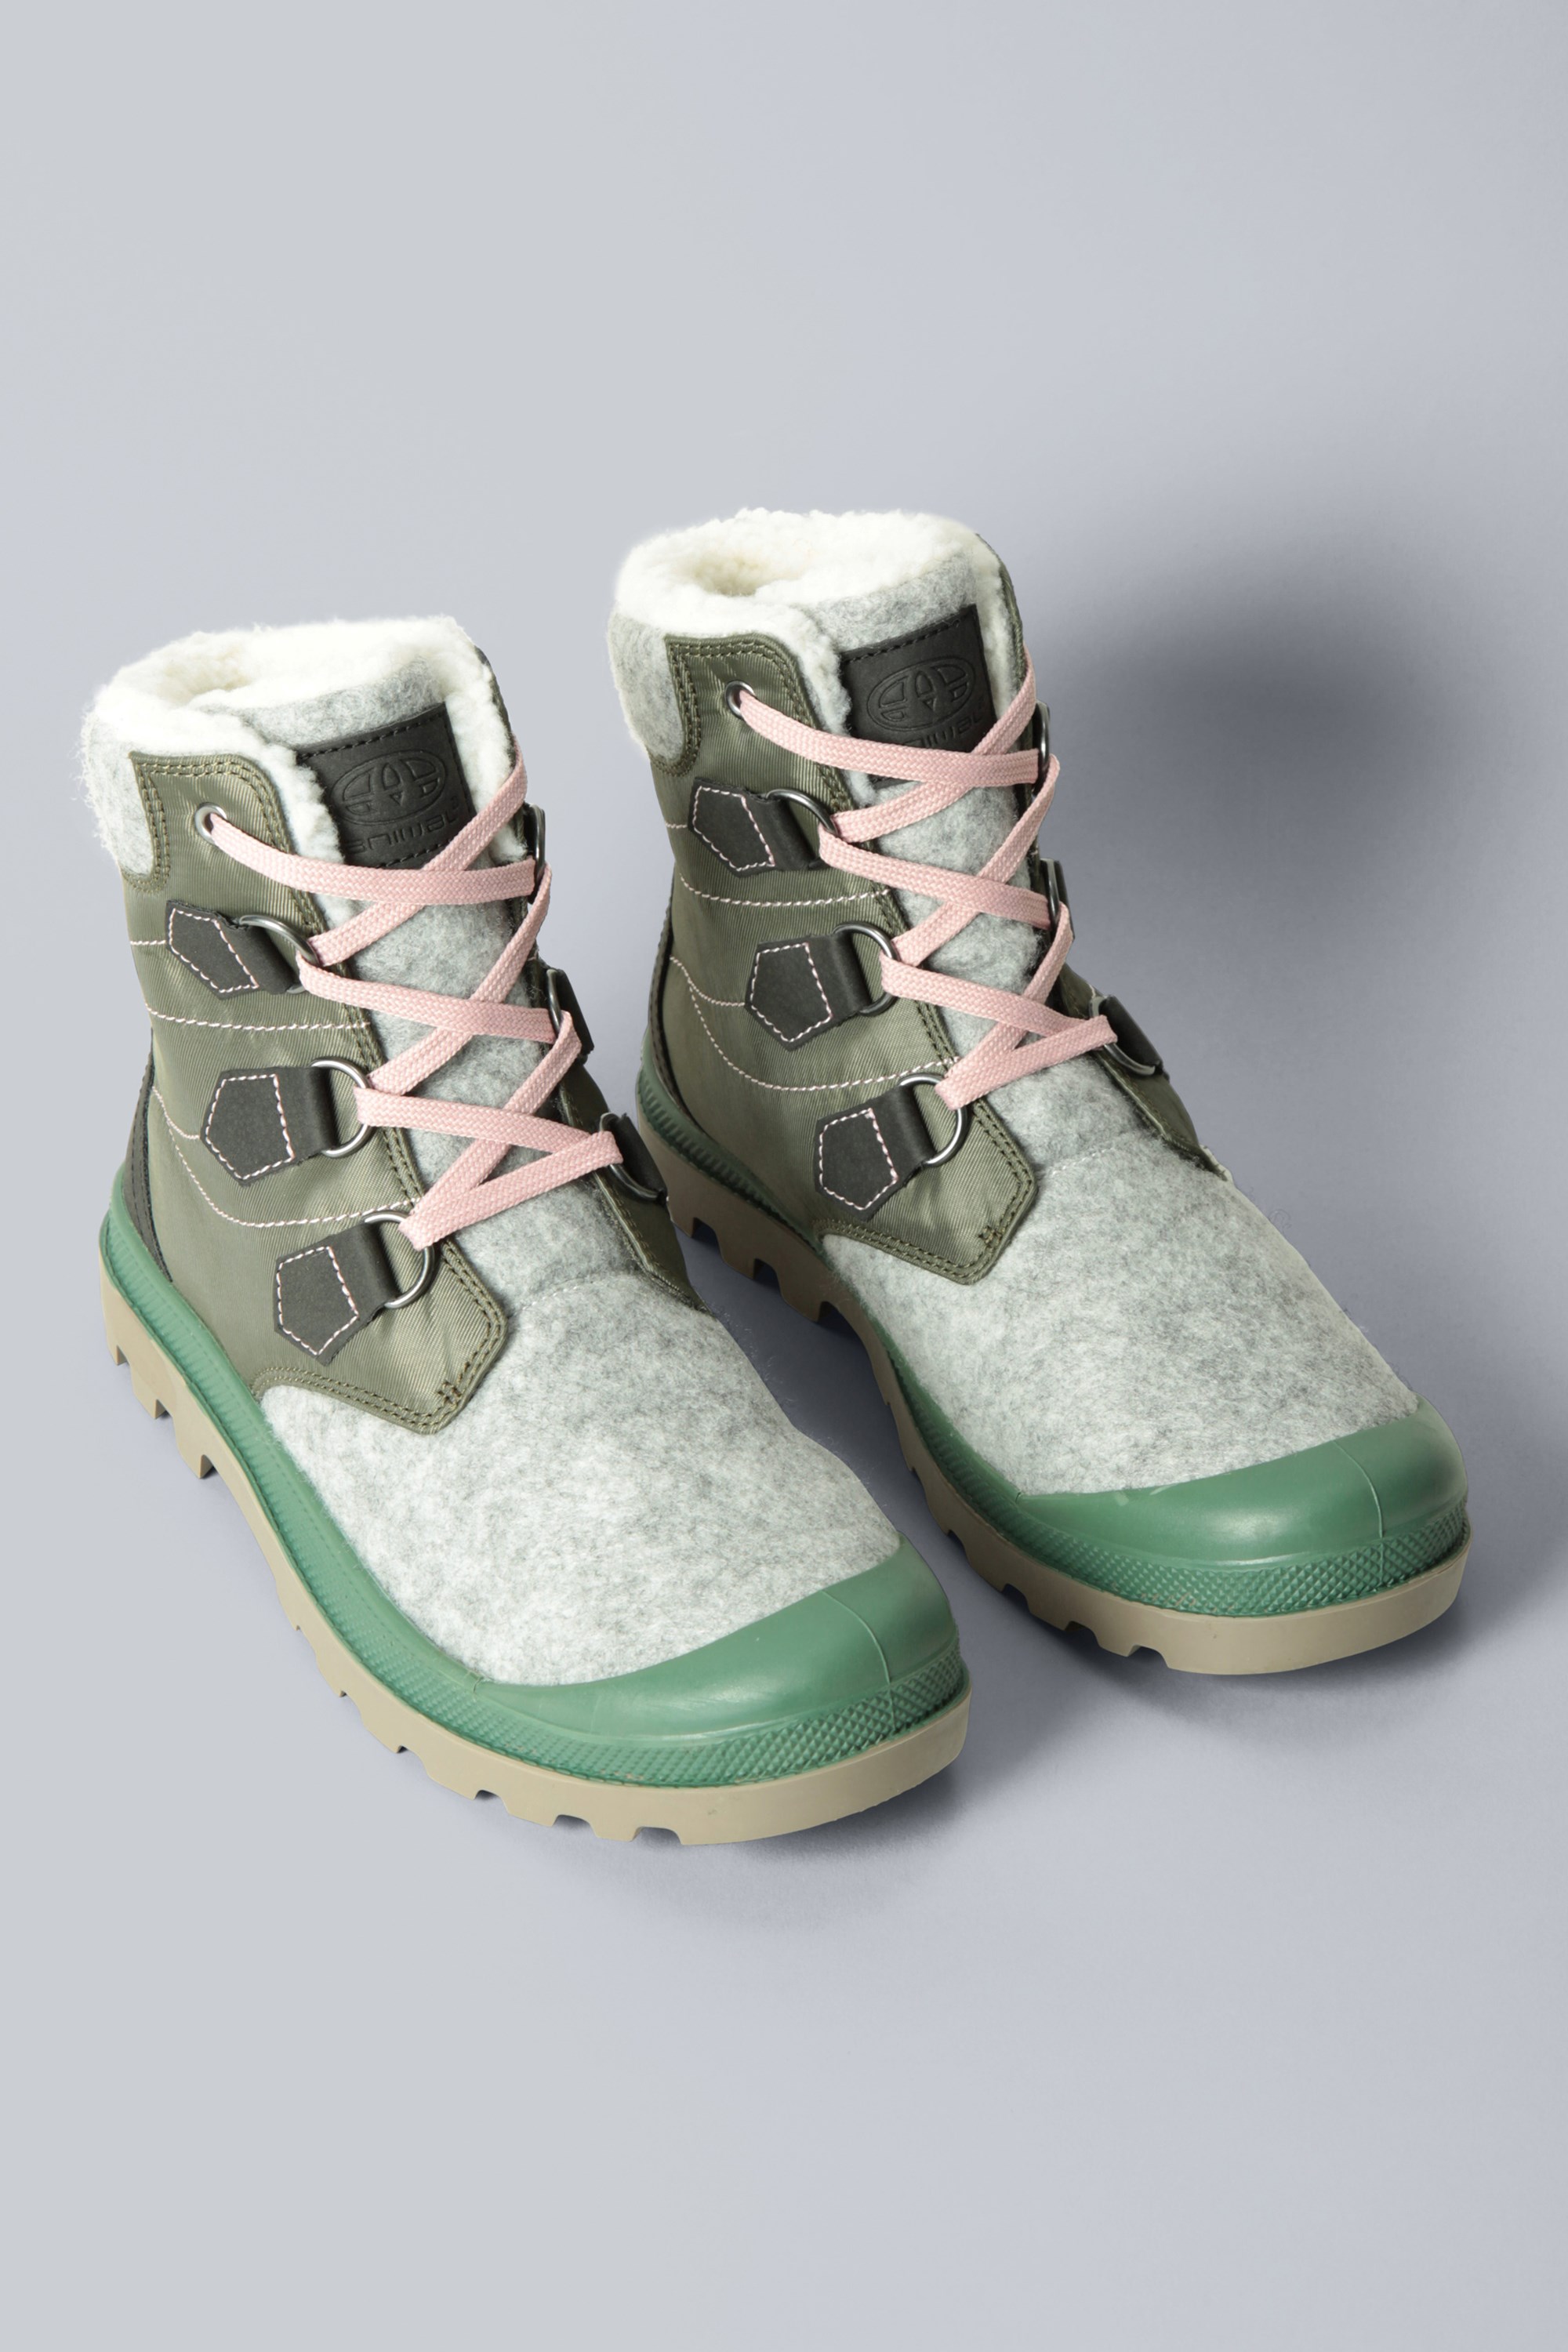 Kids Winter Lined Boots - Green